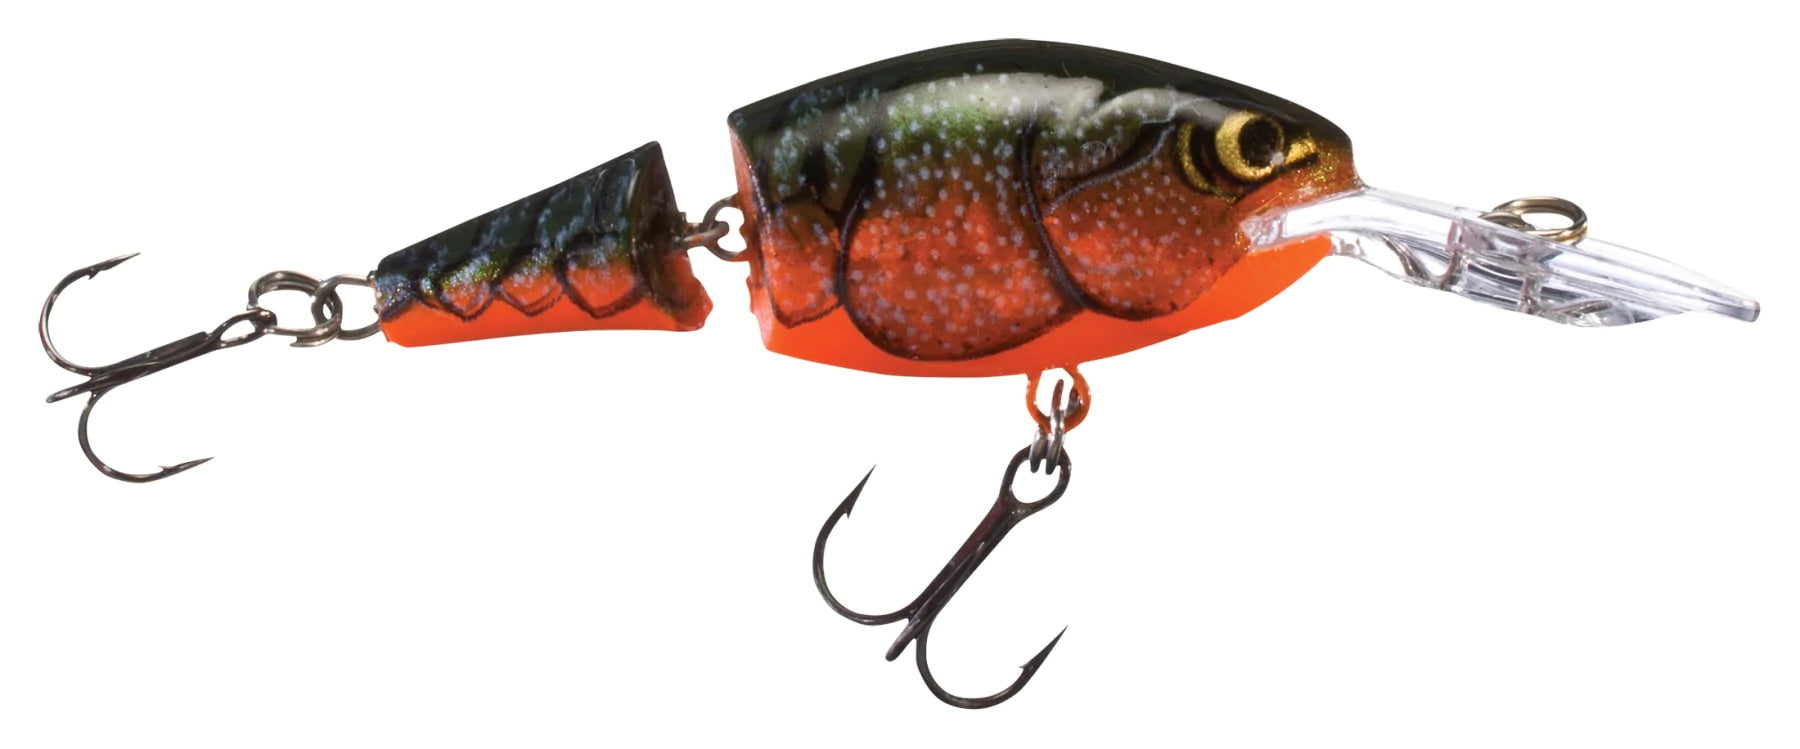  Rapala Jointed Shad Rap 04 Fishing lure (Baby Bass, Size- 1.5)  : Fishing Diving Lures : Sports & Outdoors